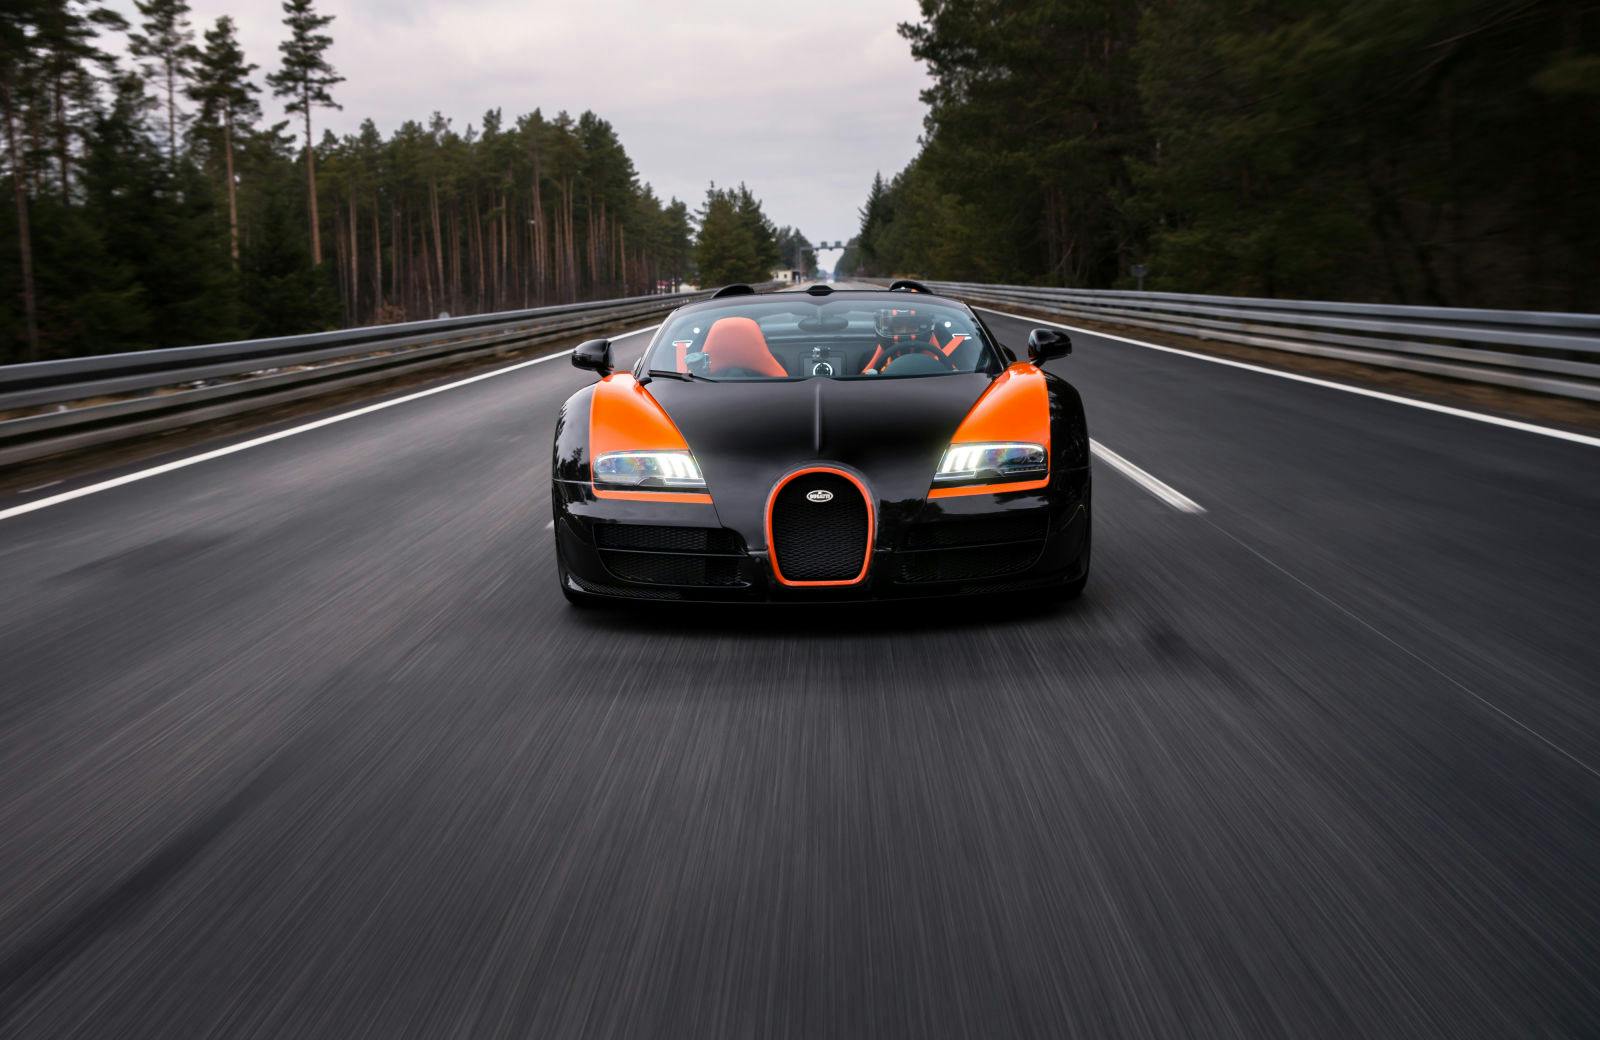 The Veyron 16.4 Grand Sport Vitesse holds the speed record for a production car without a roof.